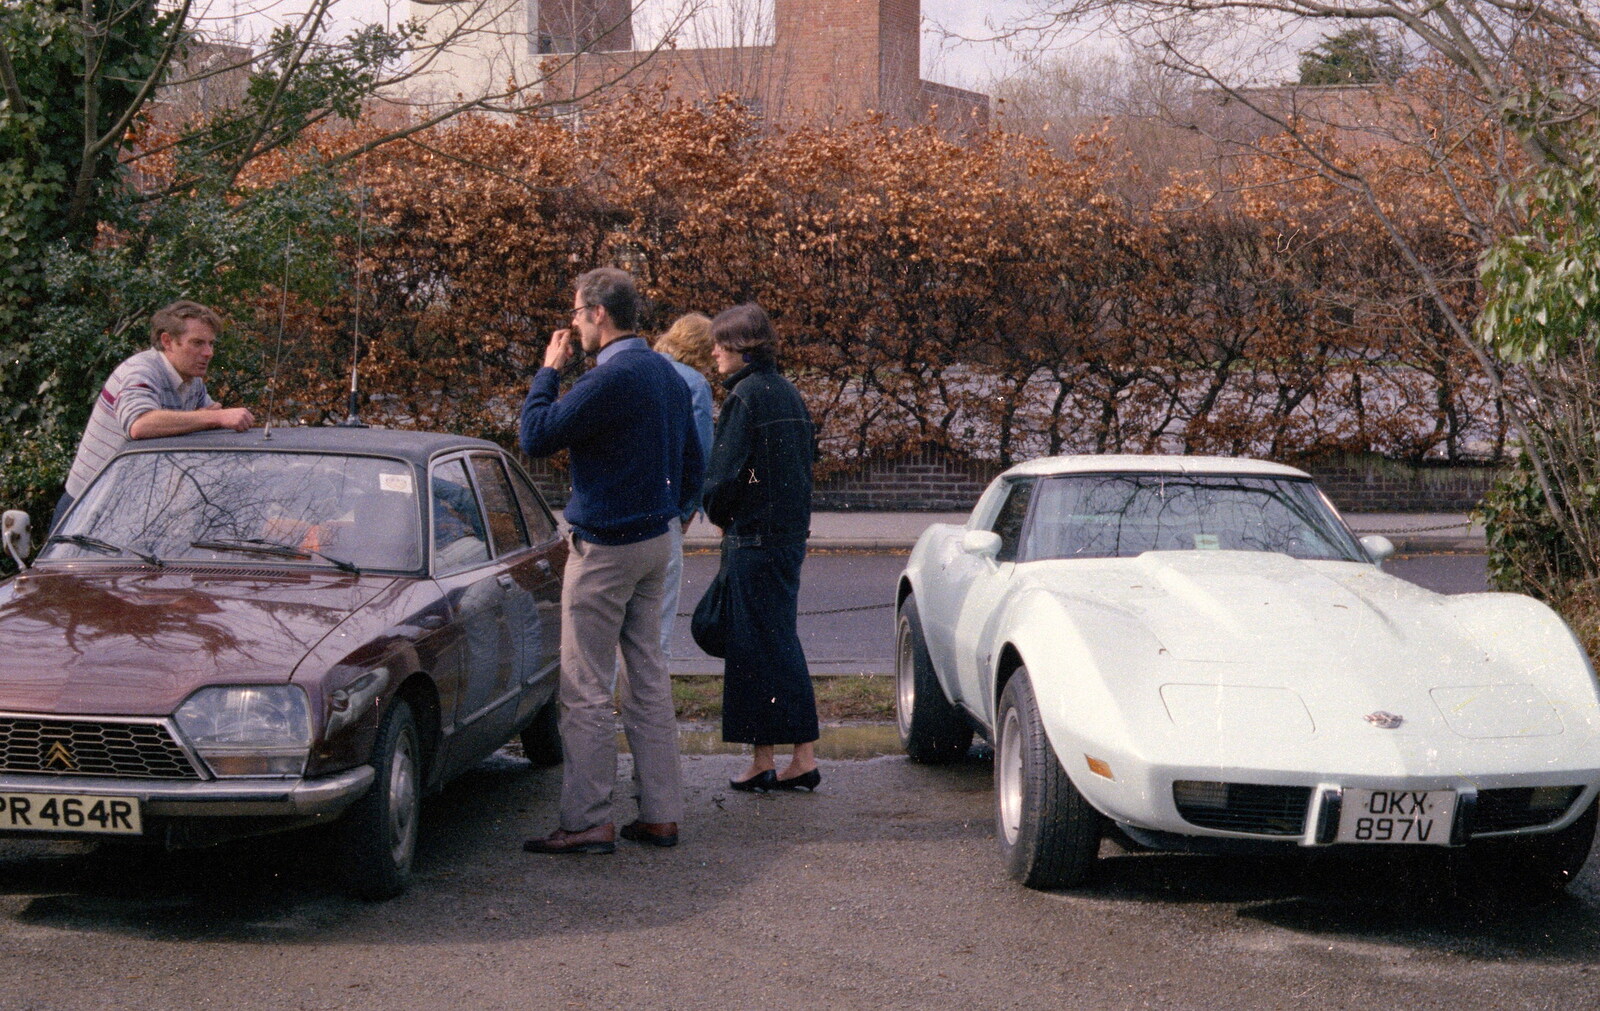 The two Brians in the Rydal car park from The Last Day of Term, and Leaving New Milton, Hampshire - 18th September 1985